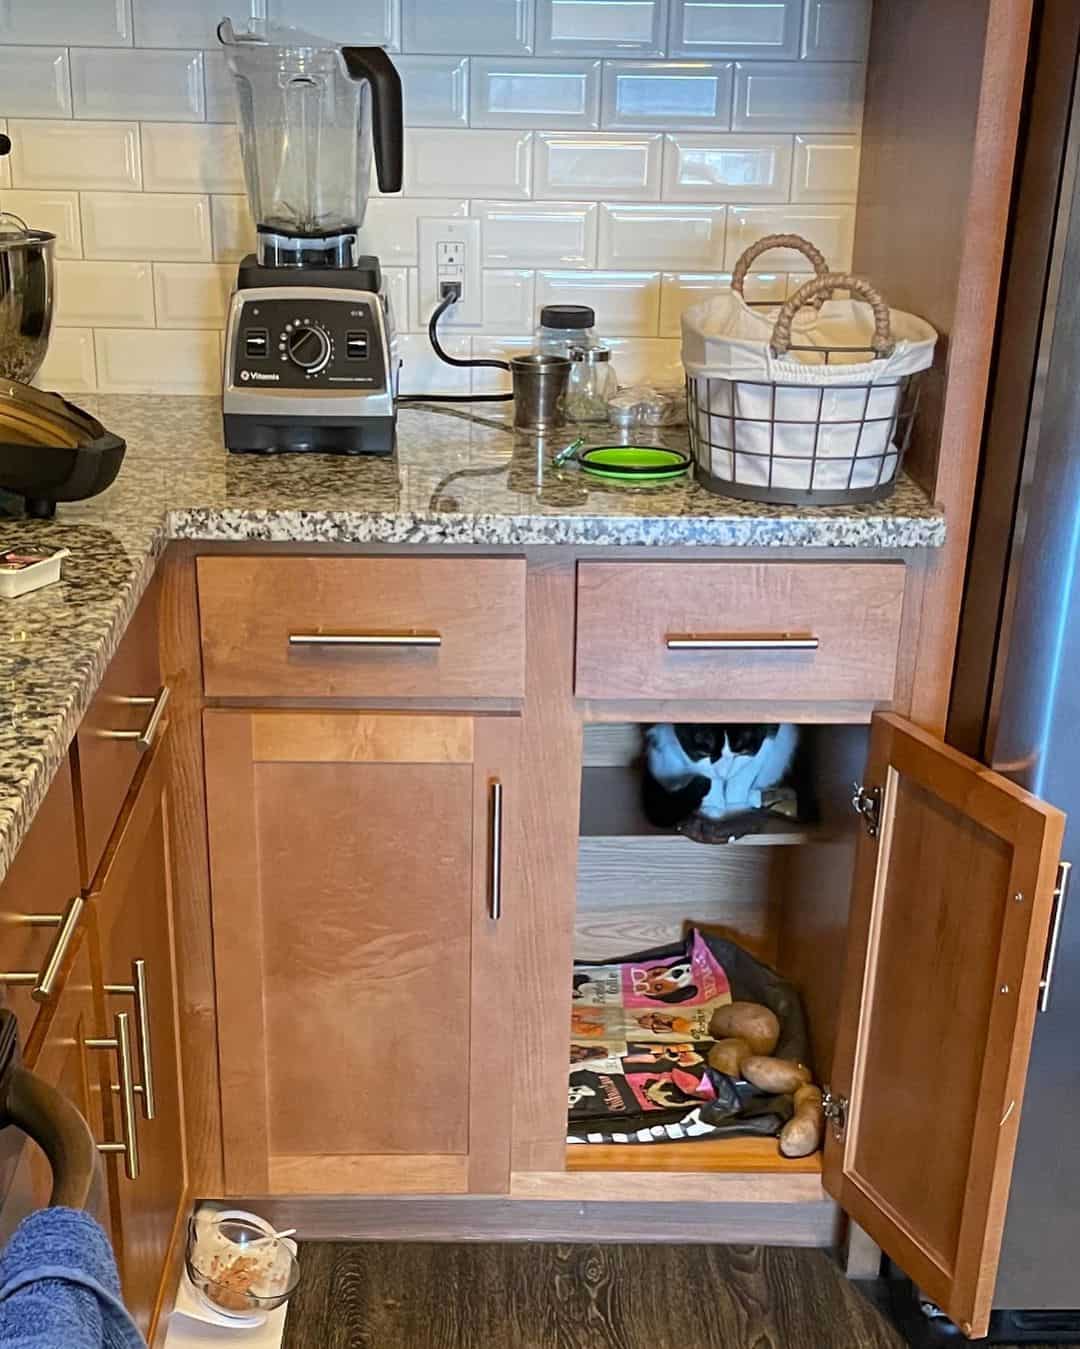 Nugget sitting in a cabinet next to his potatoes